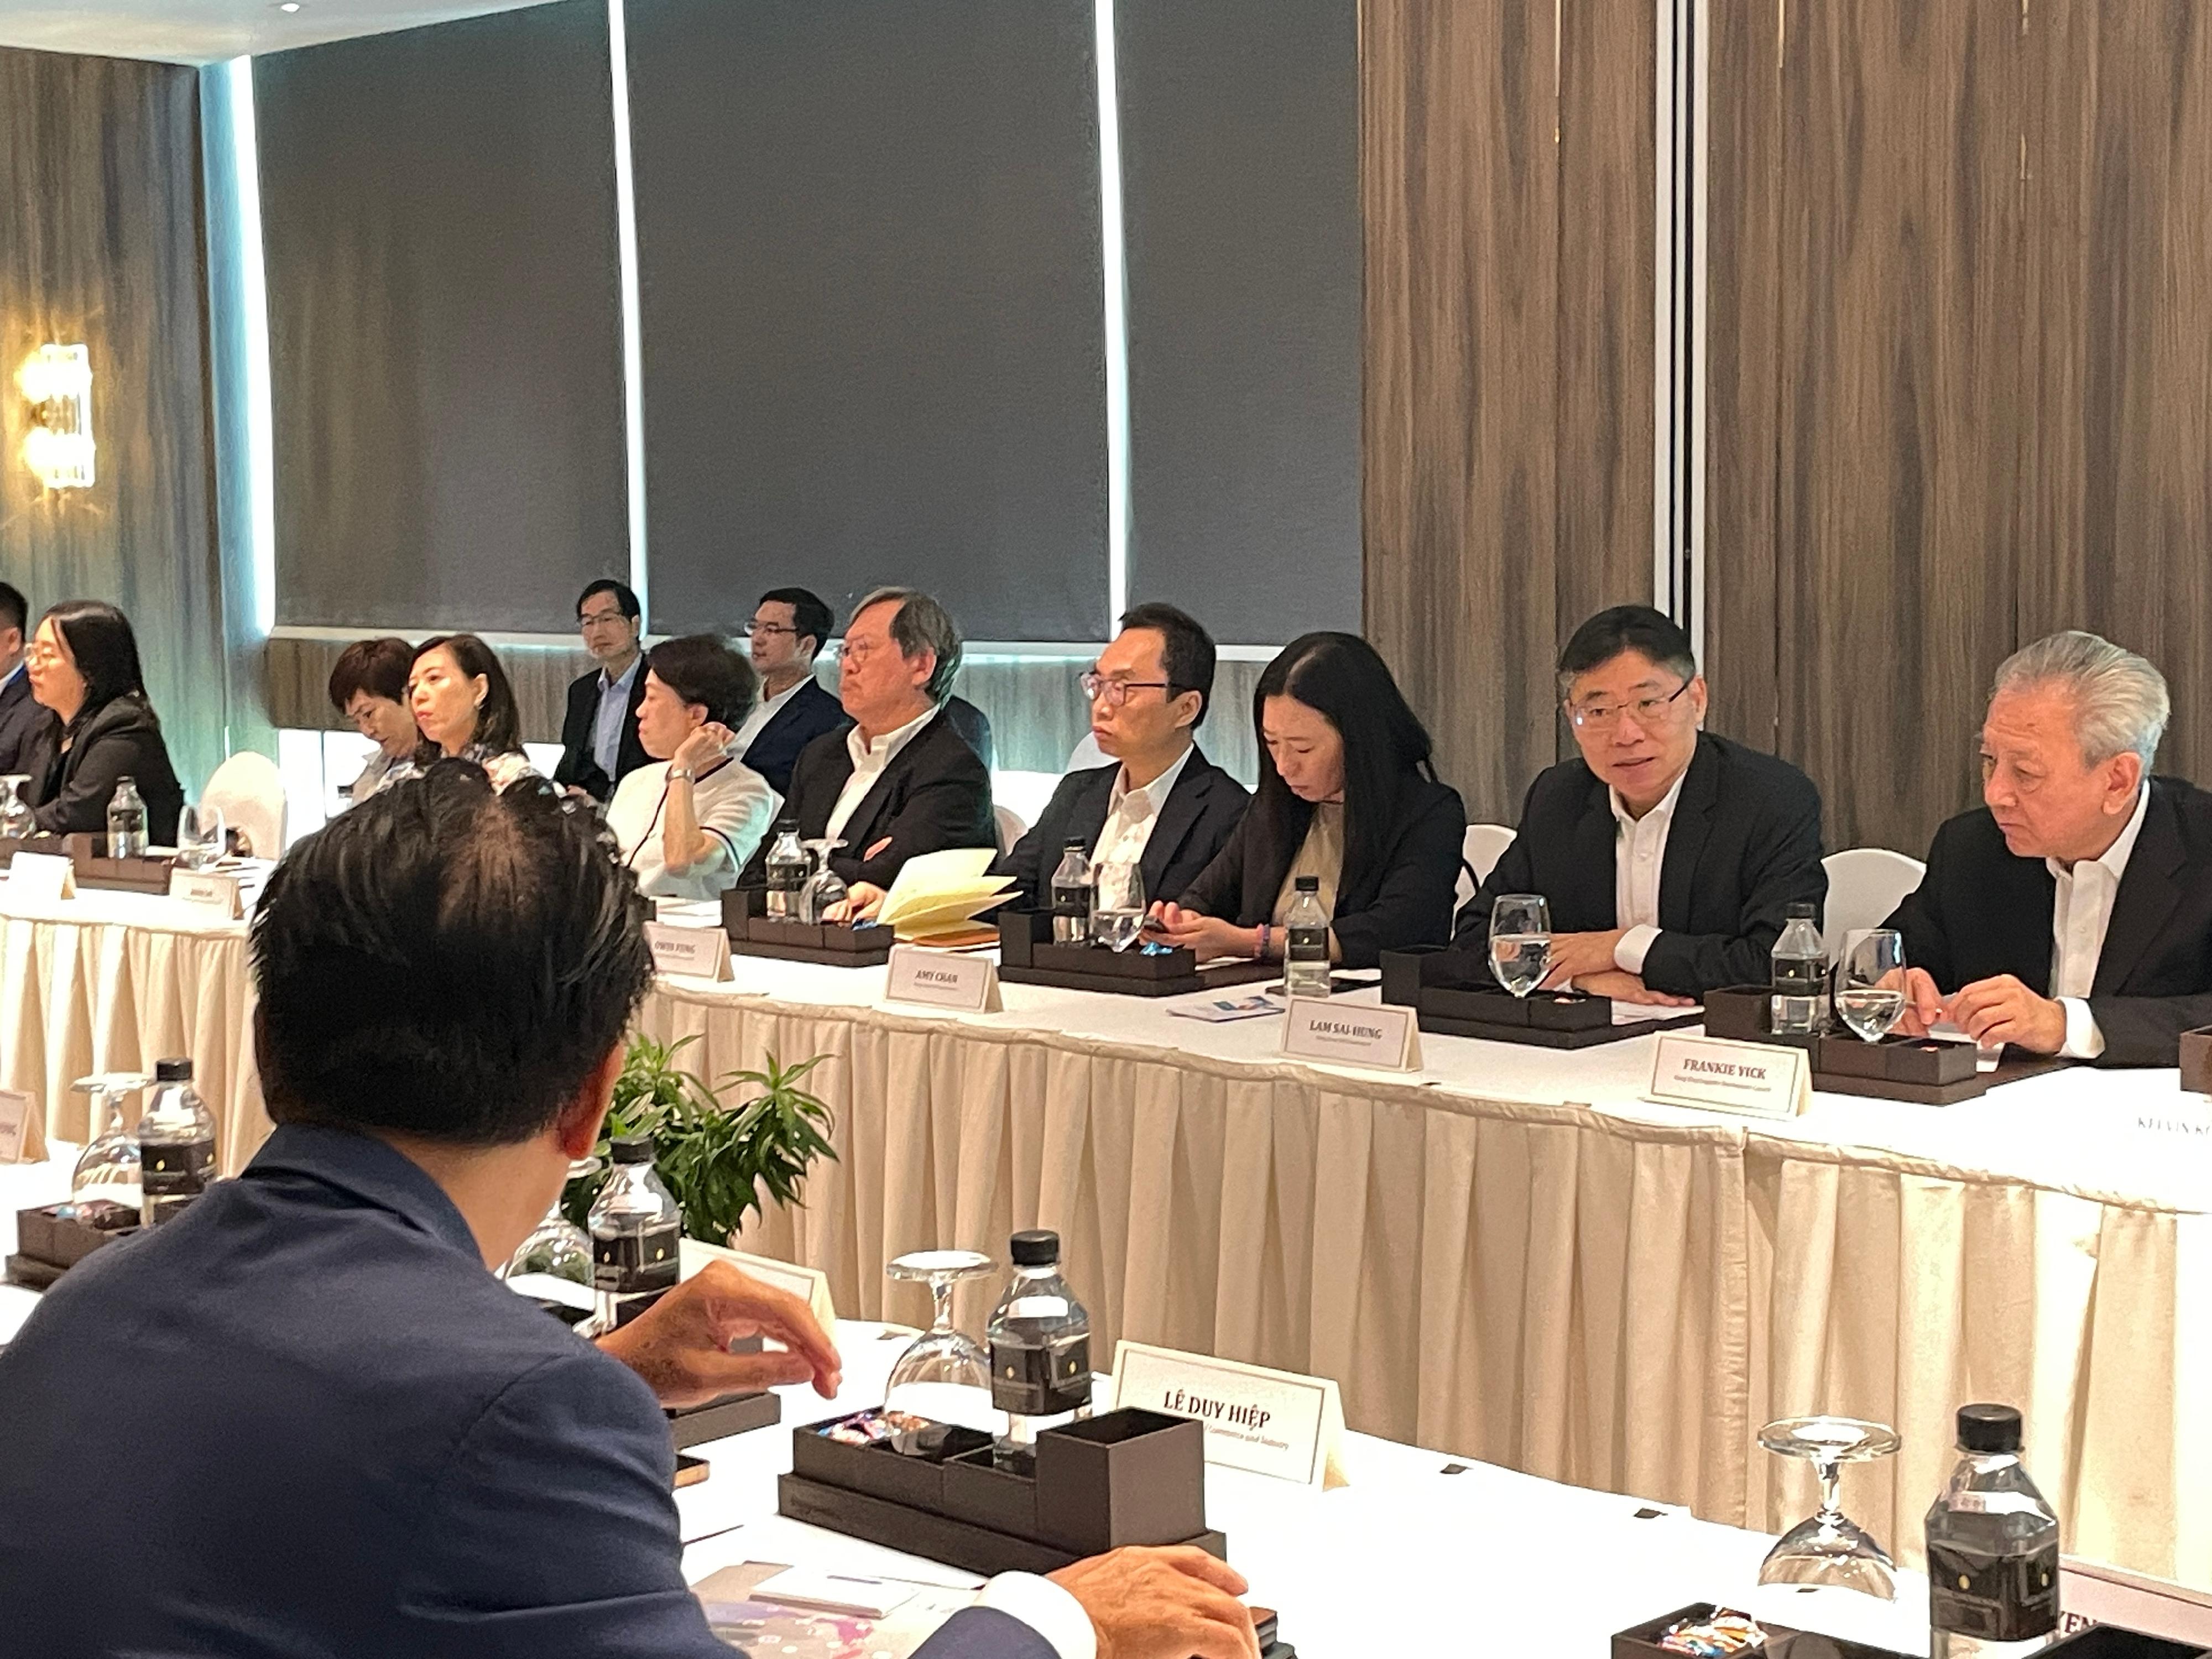 The Secretary for Transport and Logistics, Mr Lam Sai-hung (second right), together with members of the Hong Kong Logistics Development Council delegation, explored co-operation opportunities with representatives of the Vietnam Chamber of Commerce and Industry in Ho Chi Minh City, Vietnam, today (October 12).